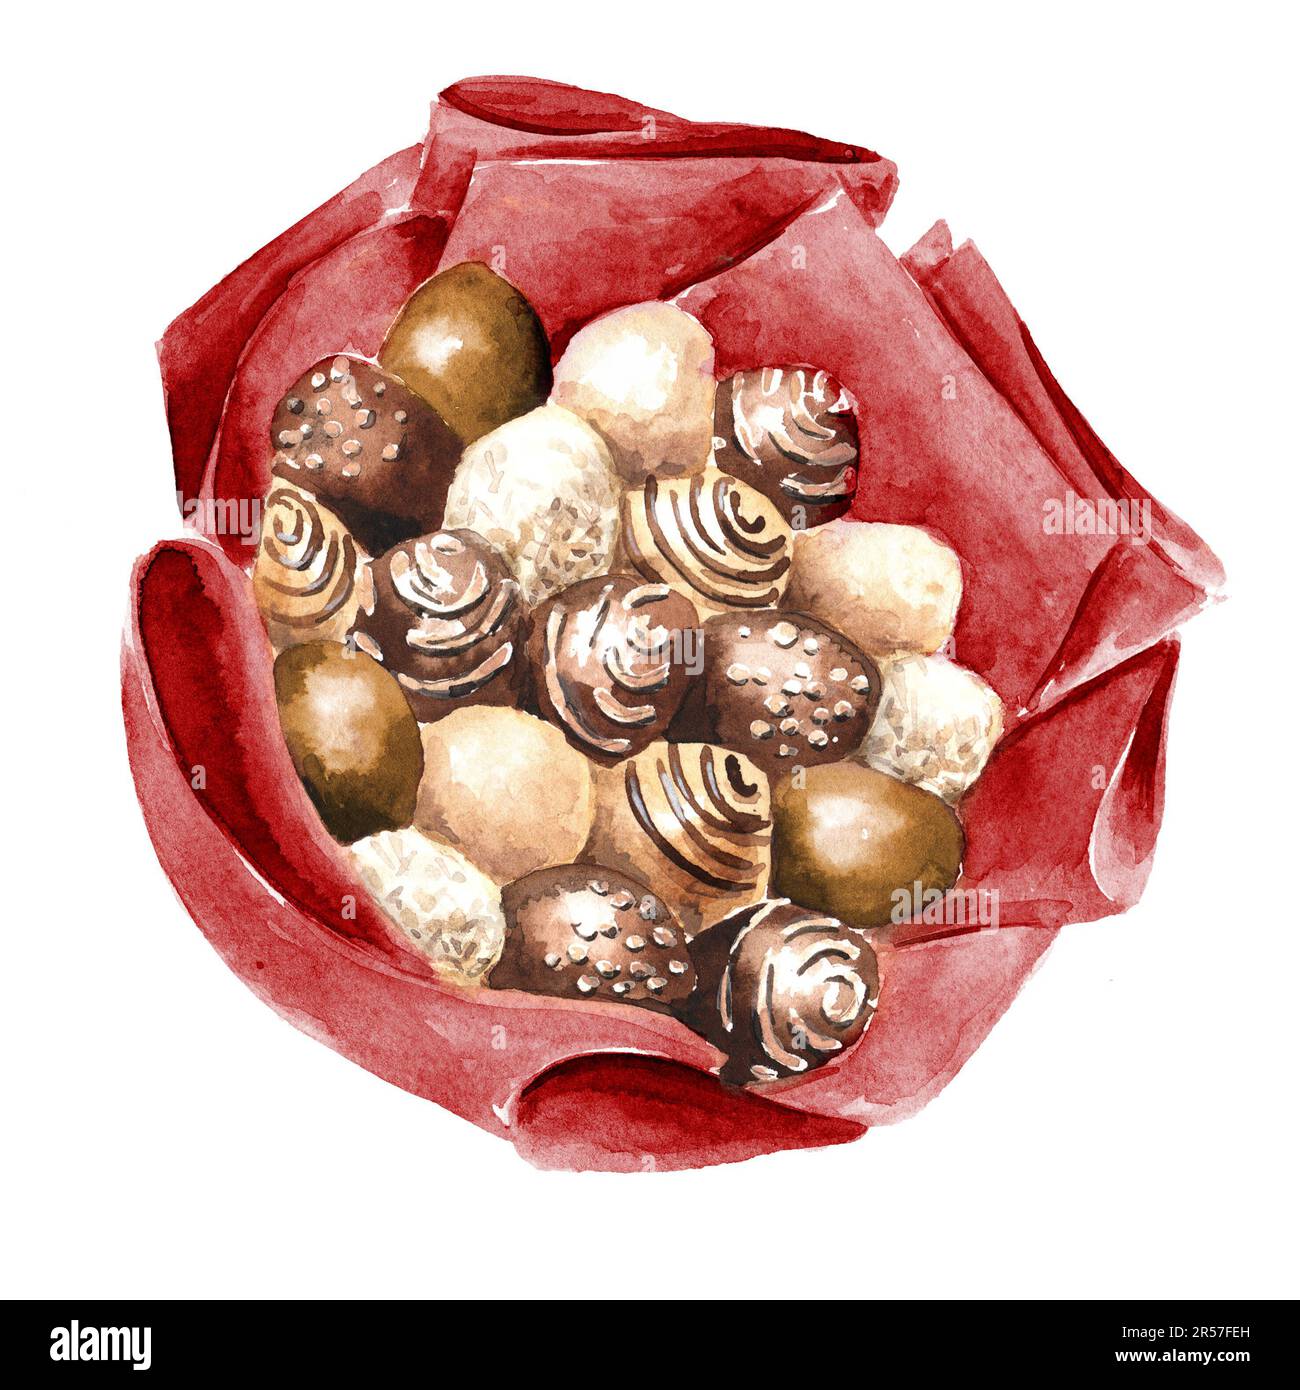 Sweet edible bouquet,  giant strawberries in glaze dipped in white and milk chocolate. Hand drawn watercolor illustration isolated on white background Stock Photo